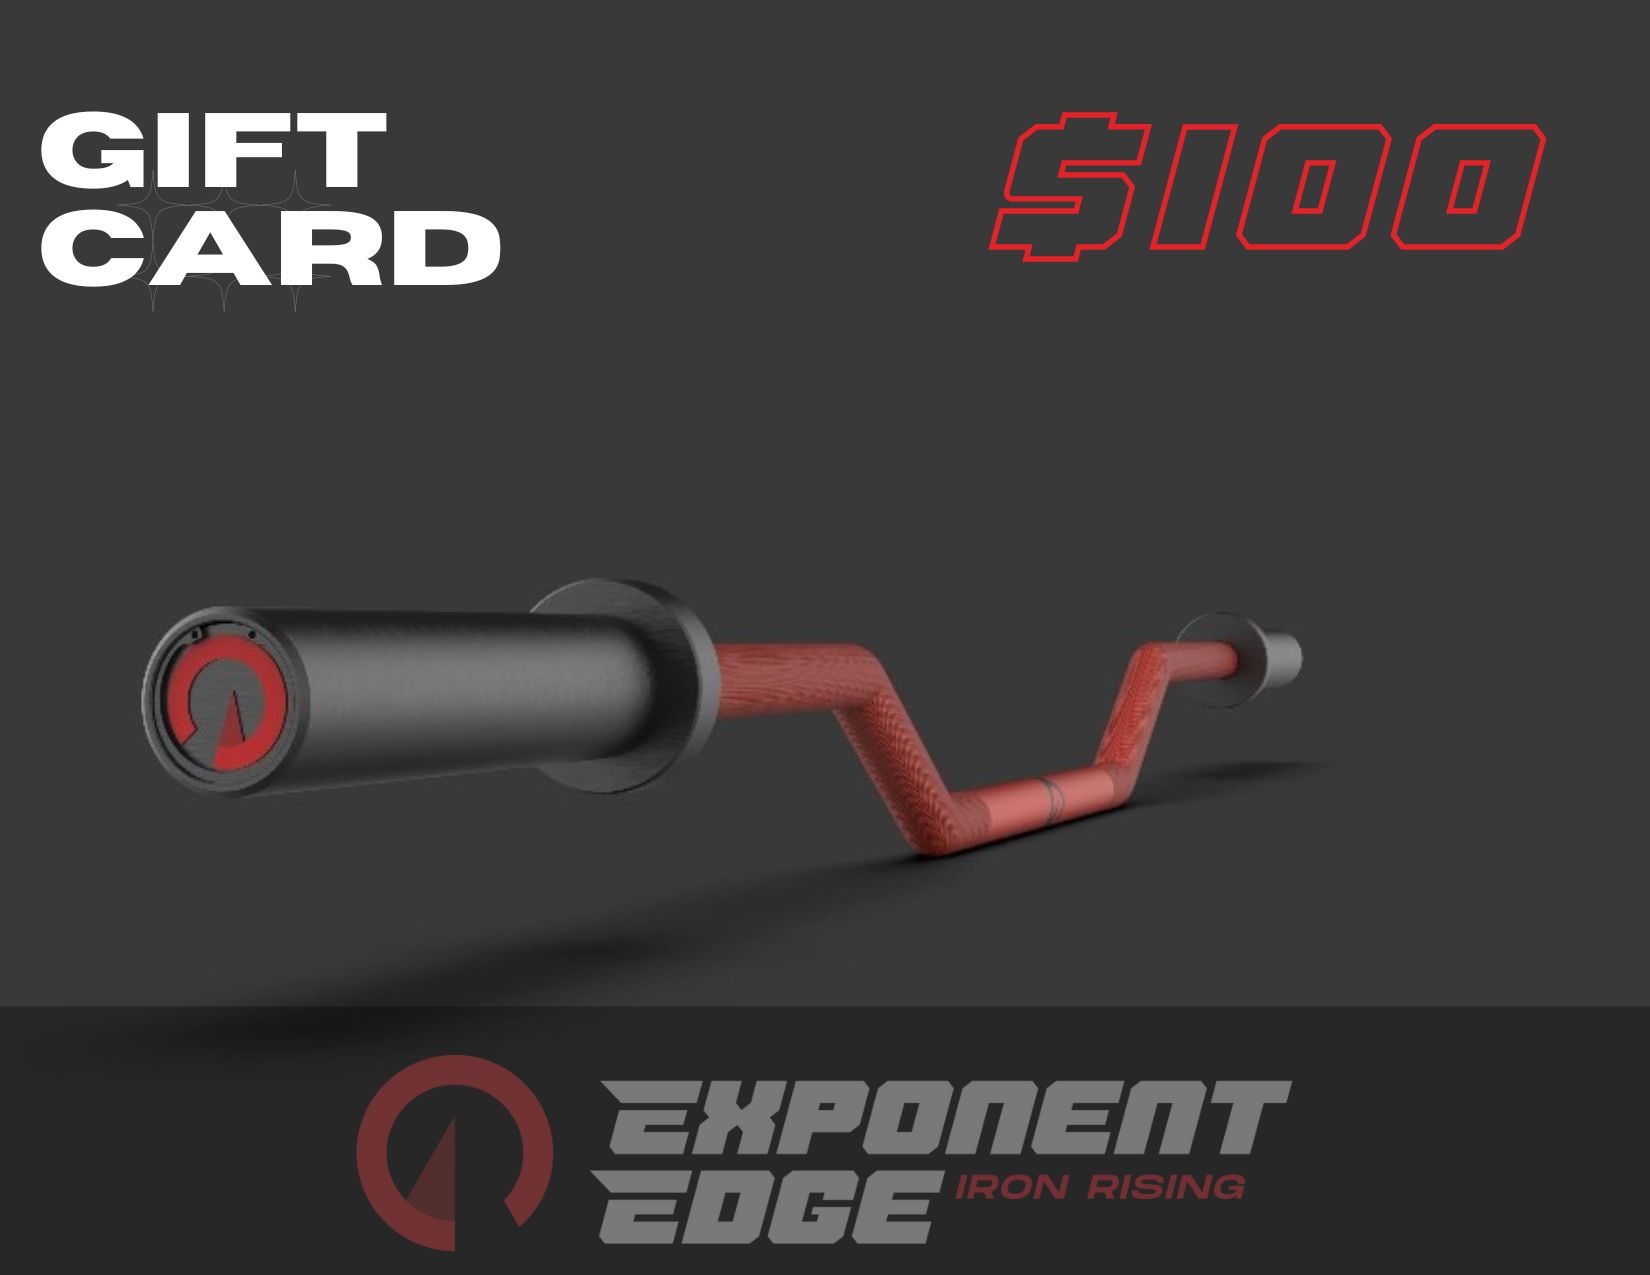 Exponent Edge Gift Card